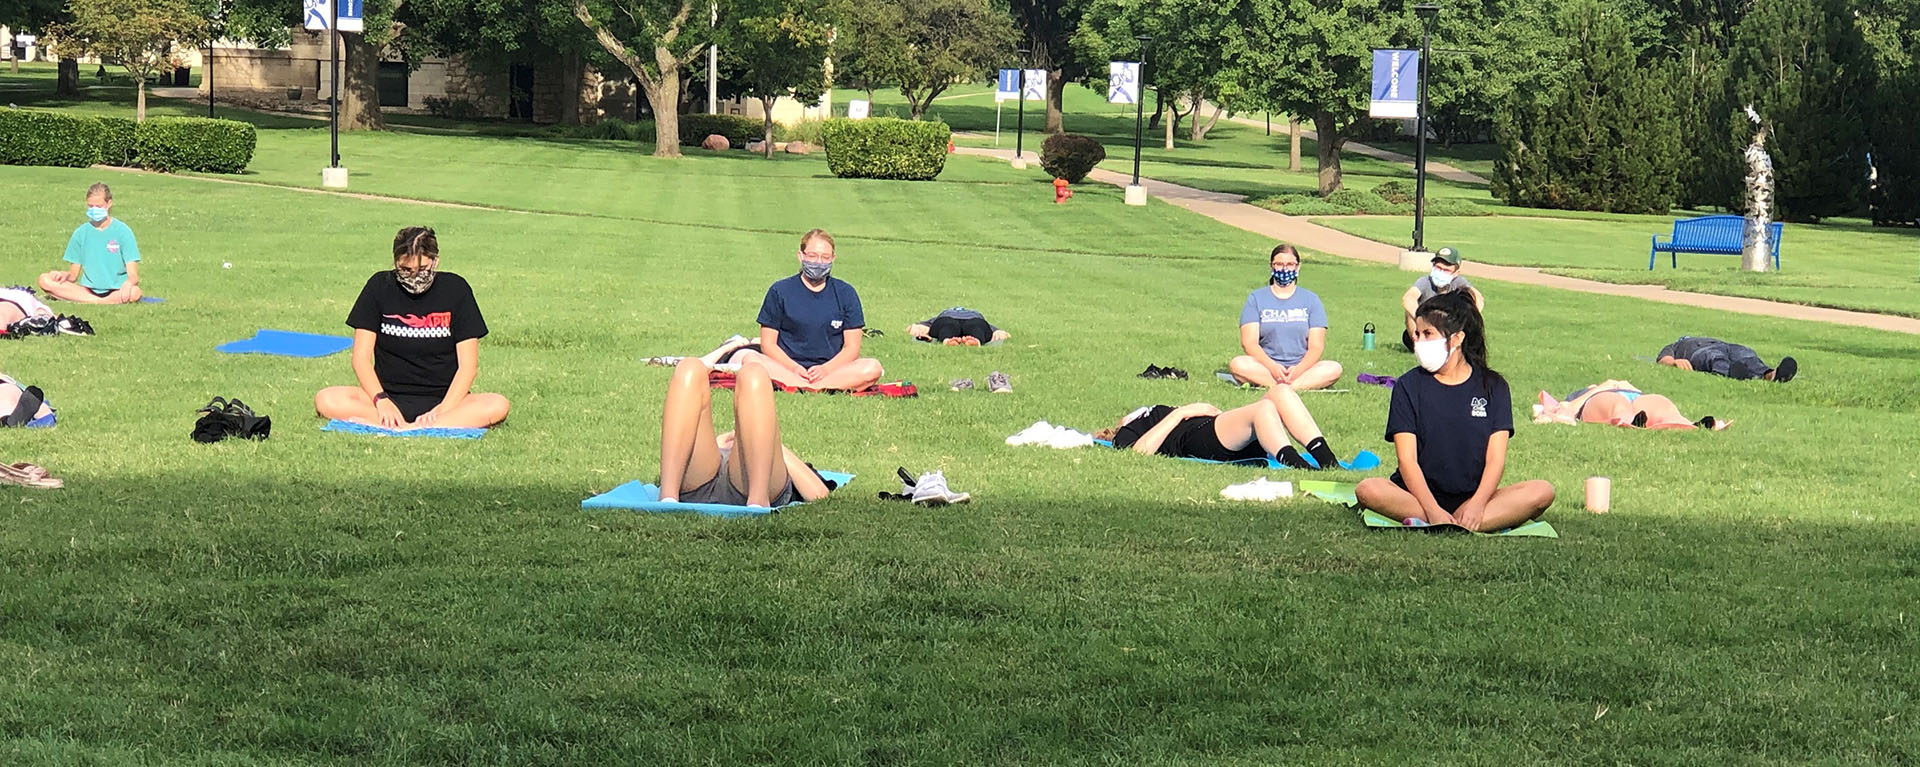 yoga on the lawn